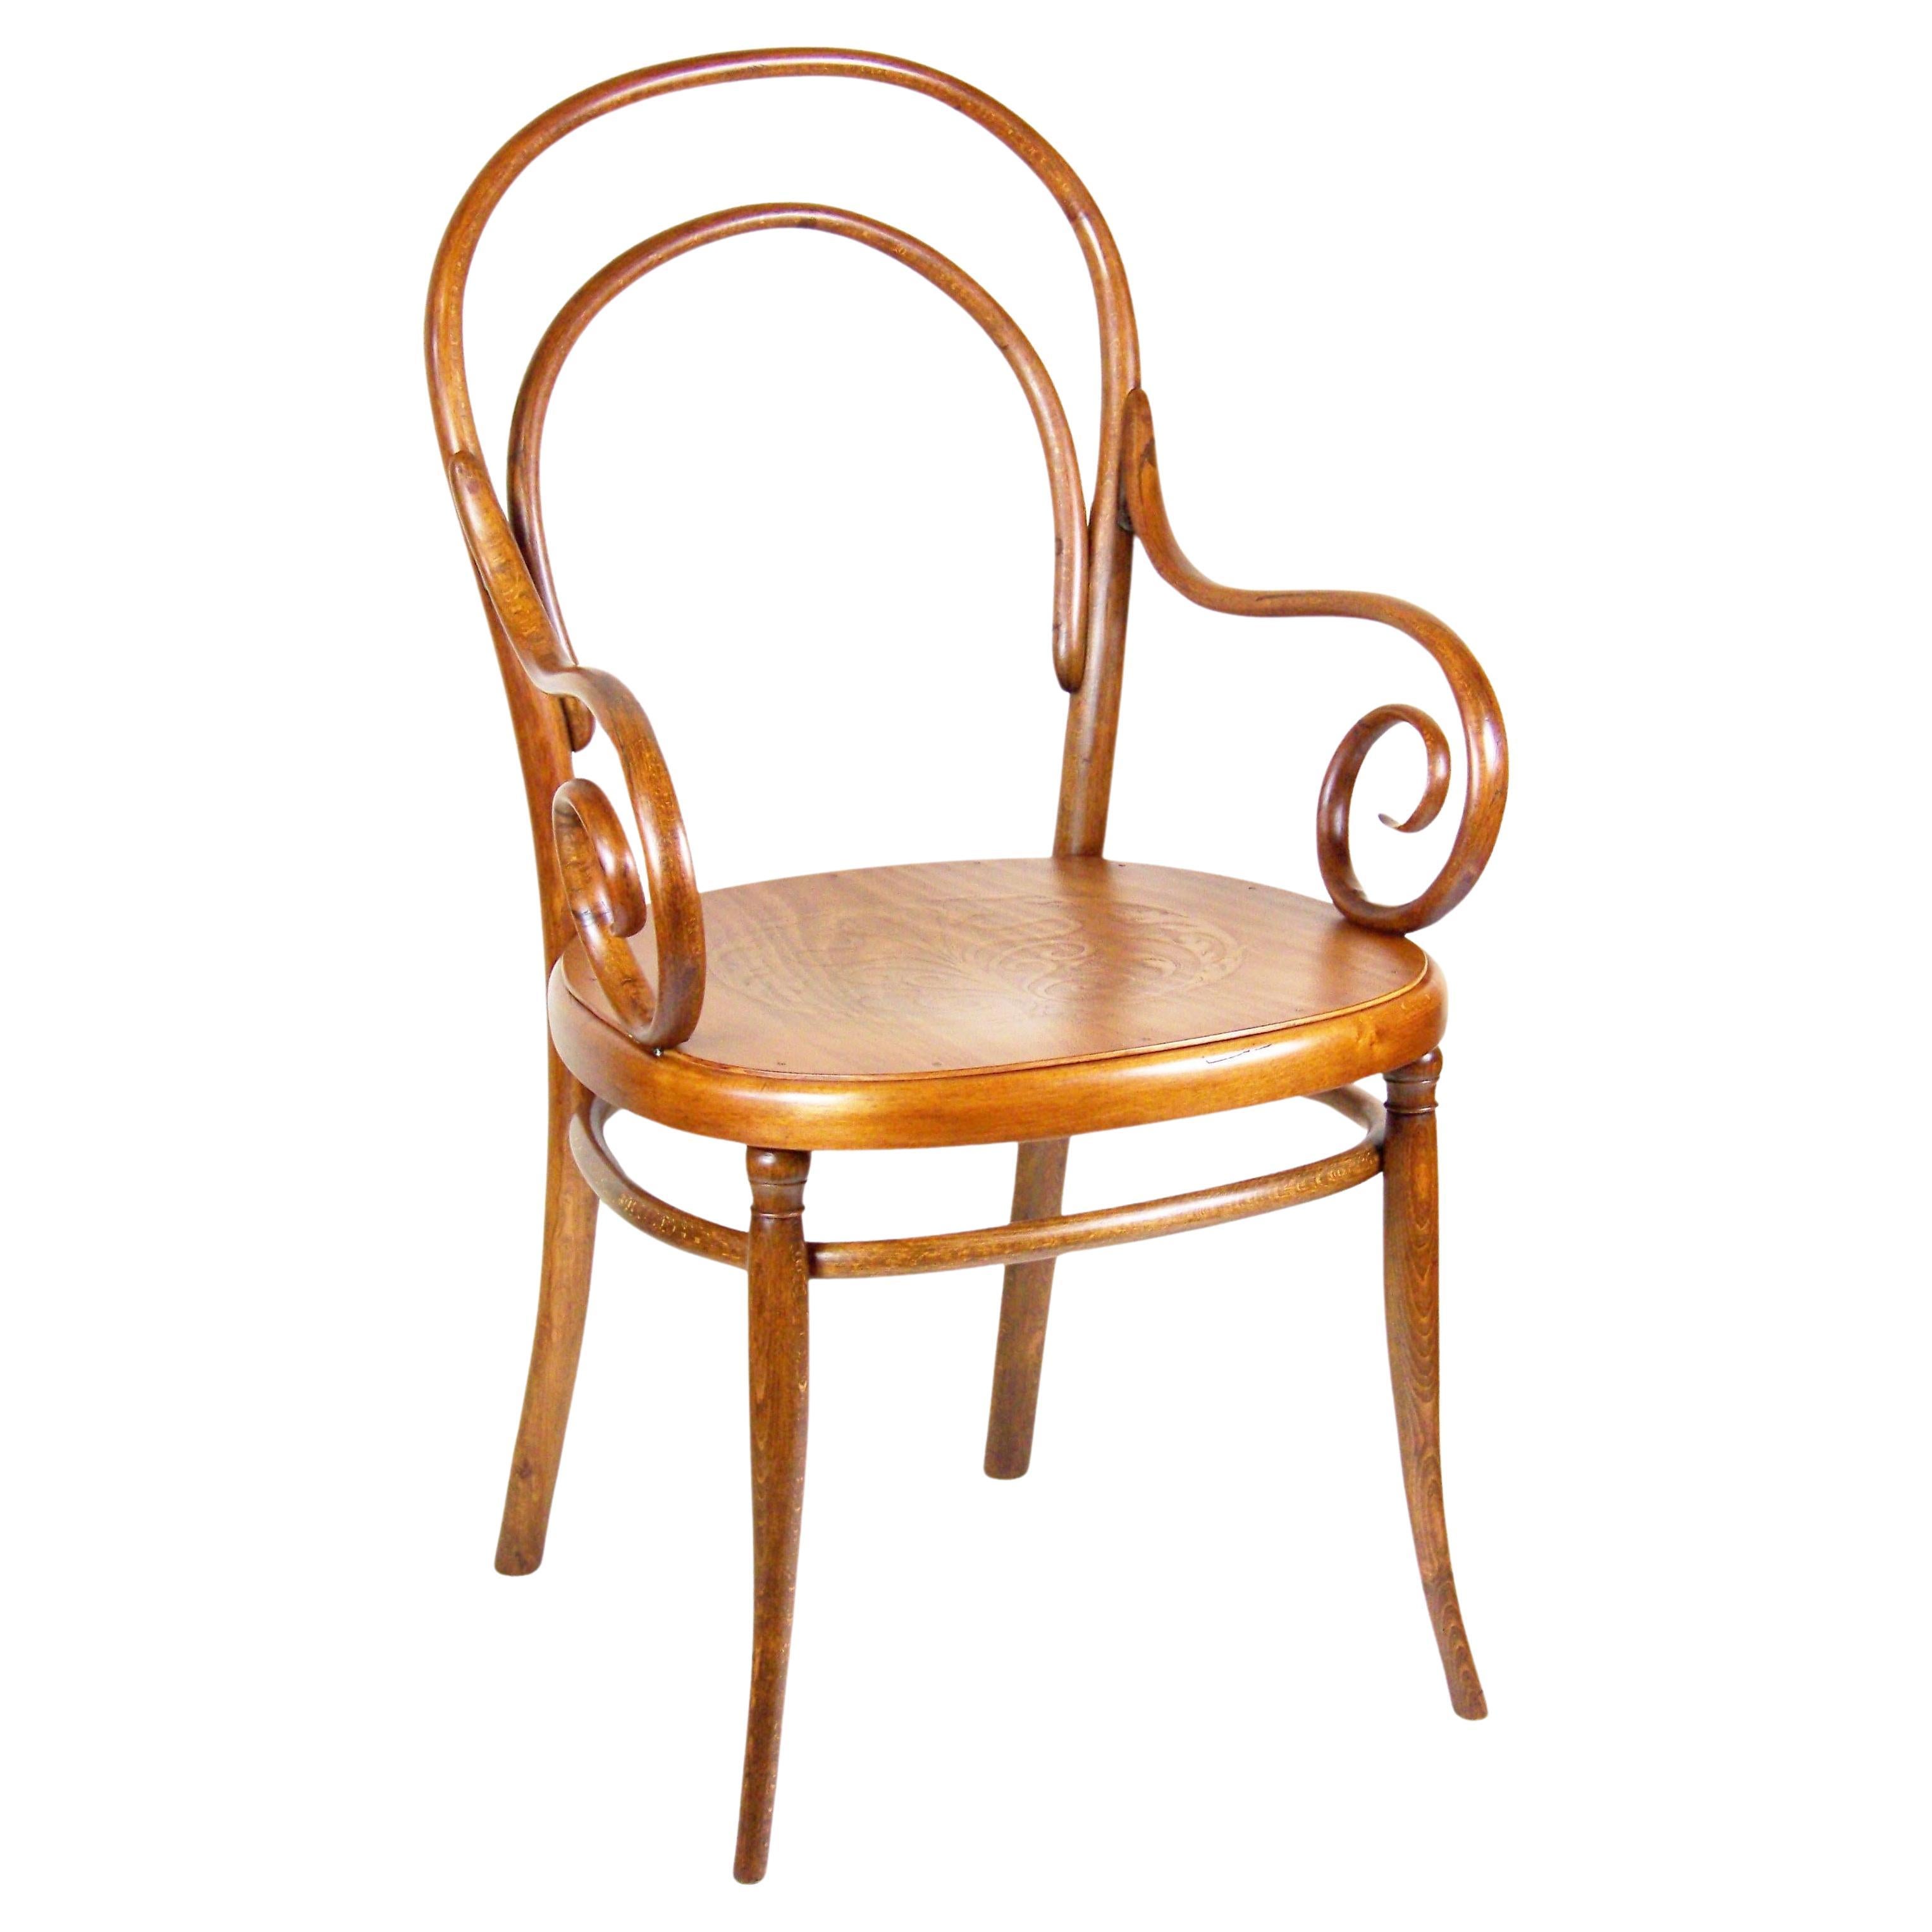 Fauteuil Thonet n° 8, vers 1870